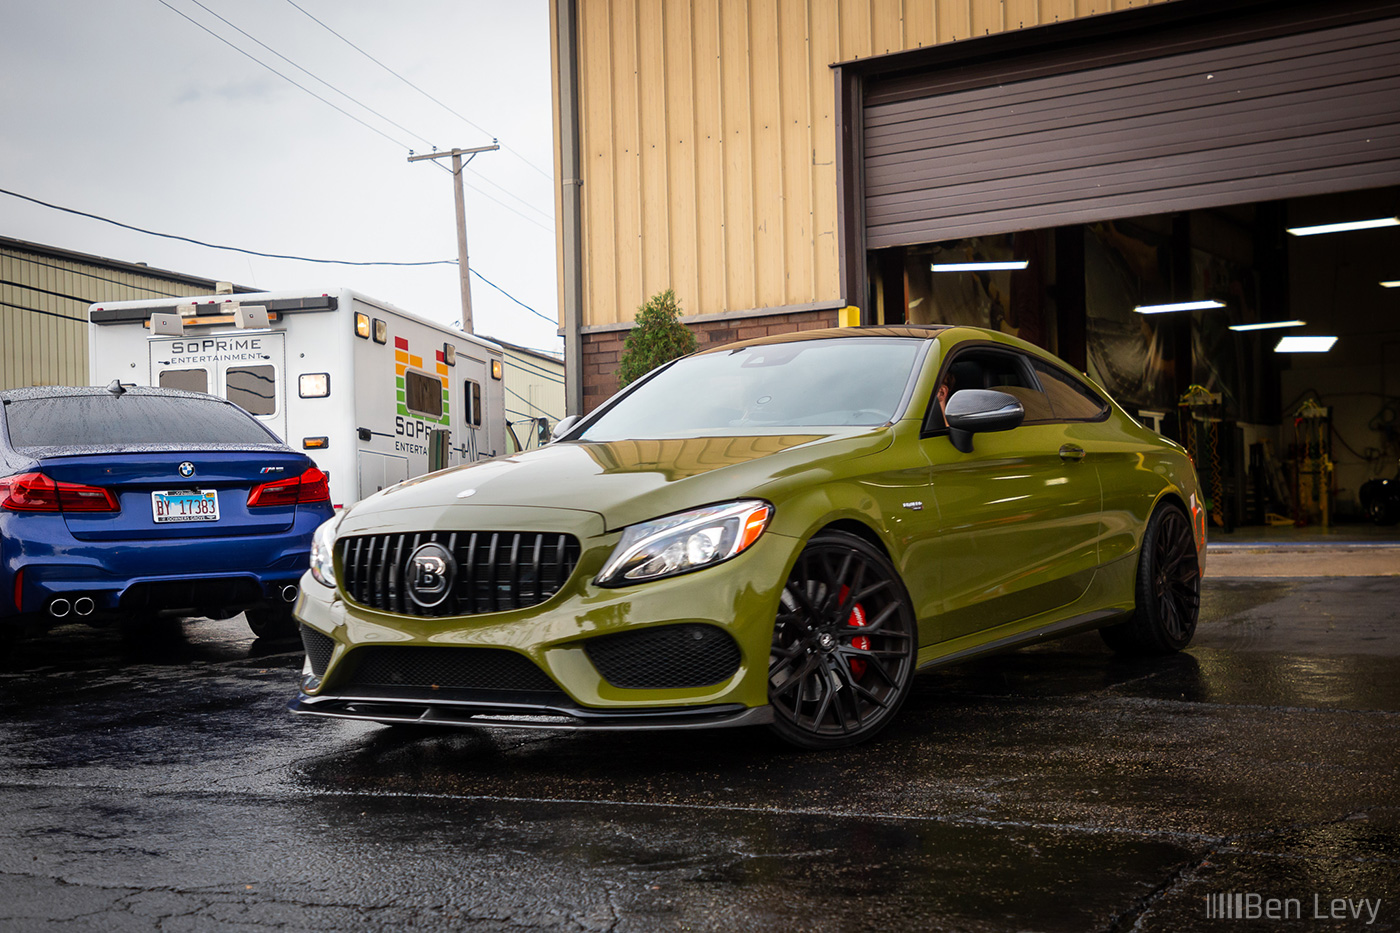 Green AMG C43 Coupe at Chicago Auto Pros Glenview